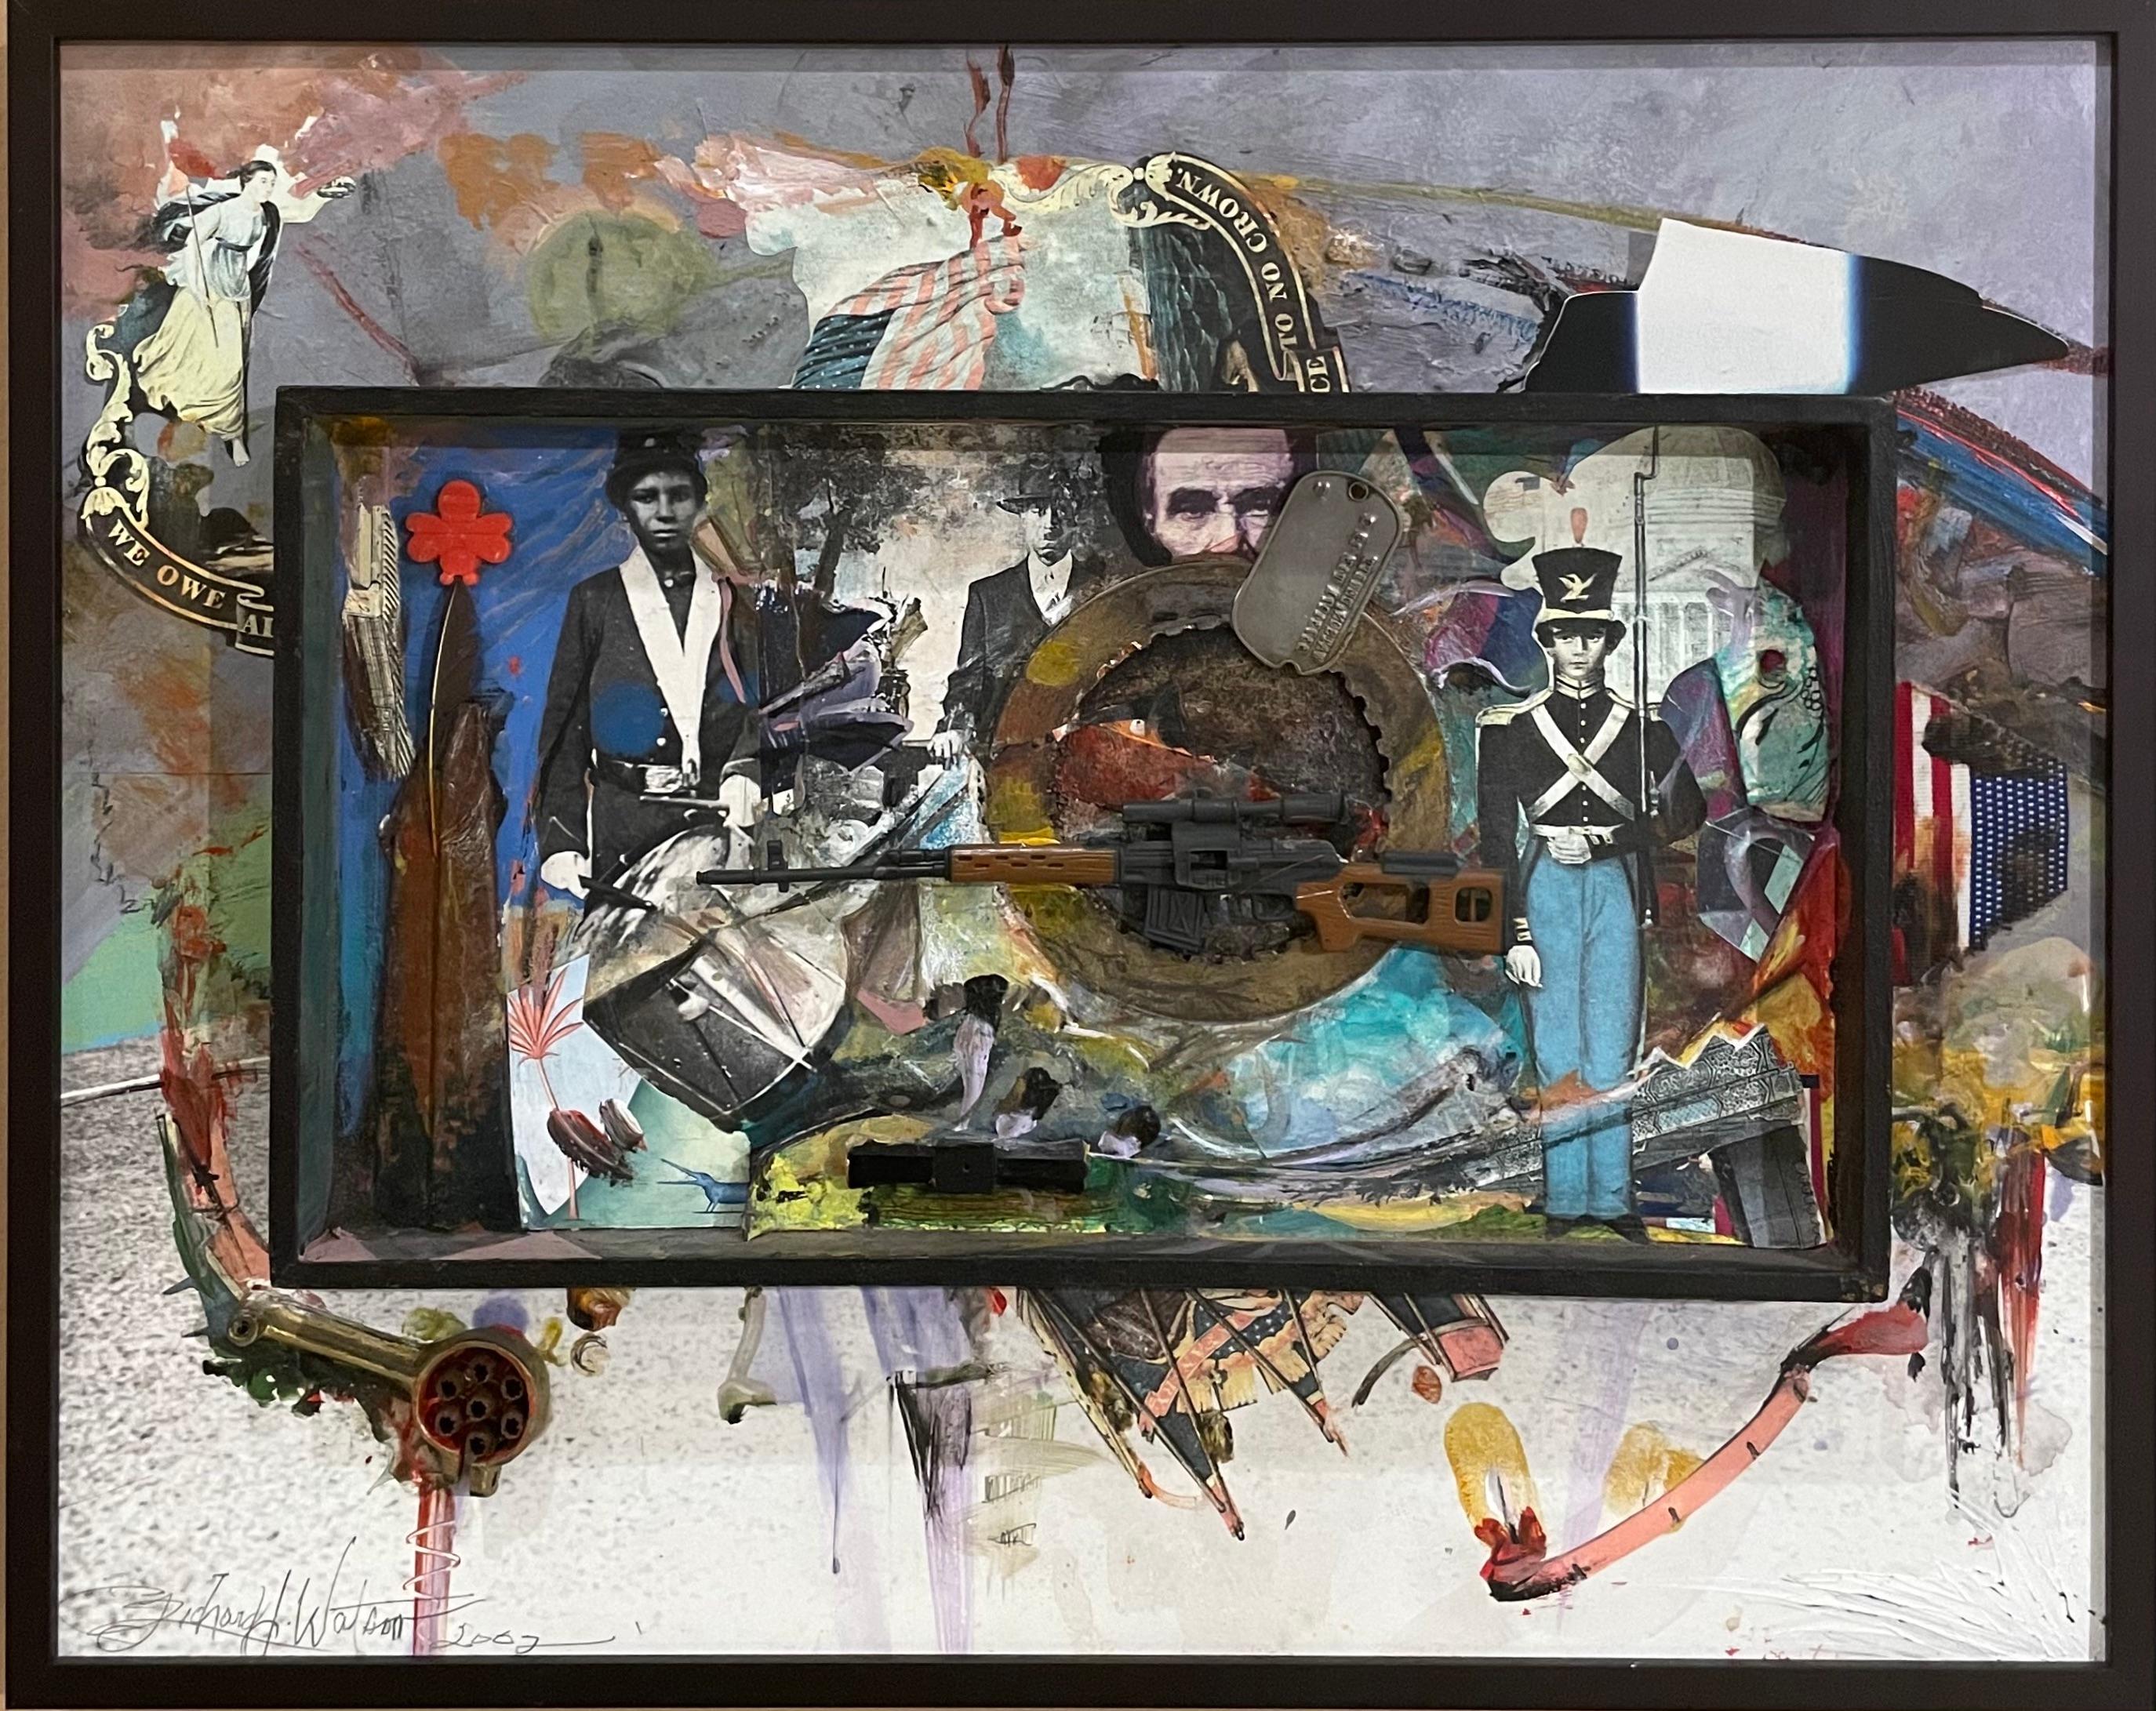 Richard J. Watson Figurative Painting - Same Tune, Different Drummer: abstract painting w/ found objects, military items